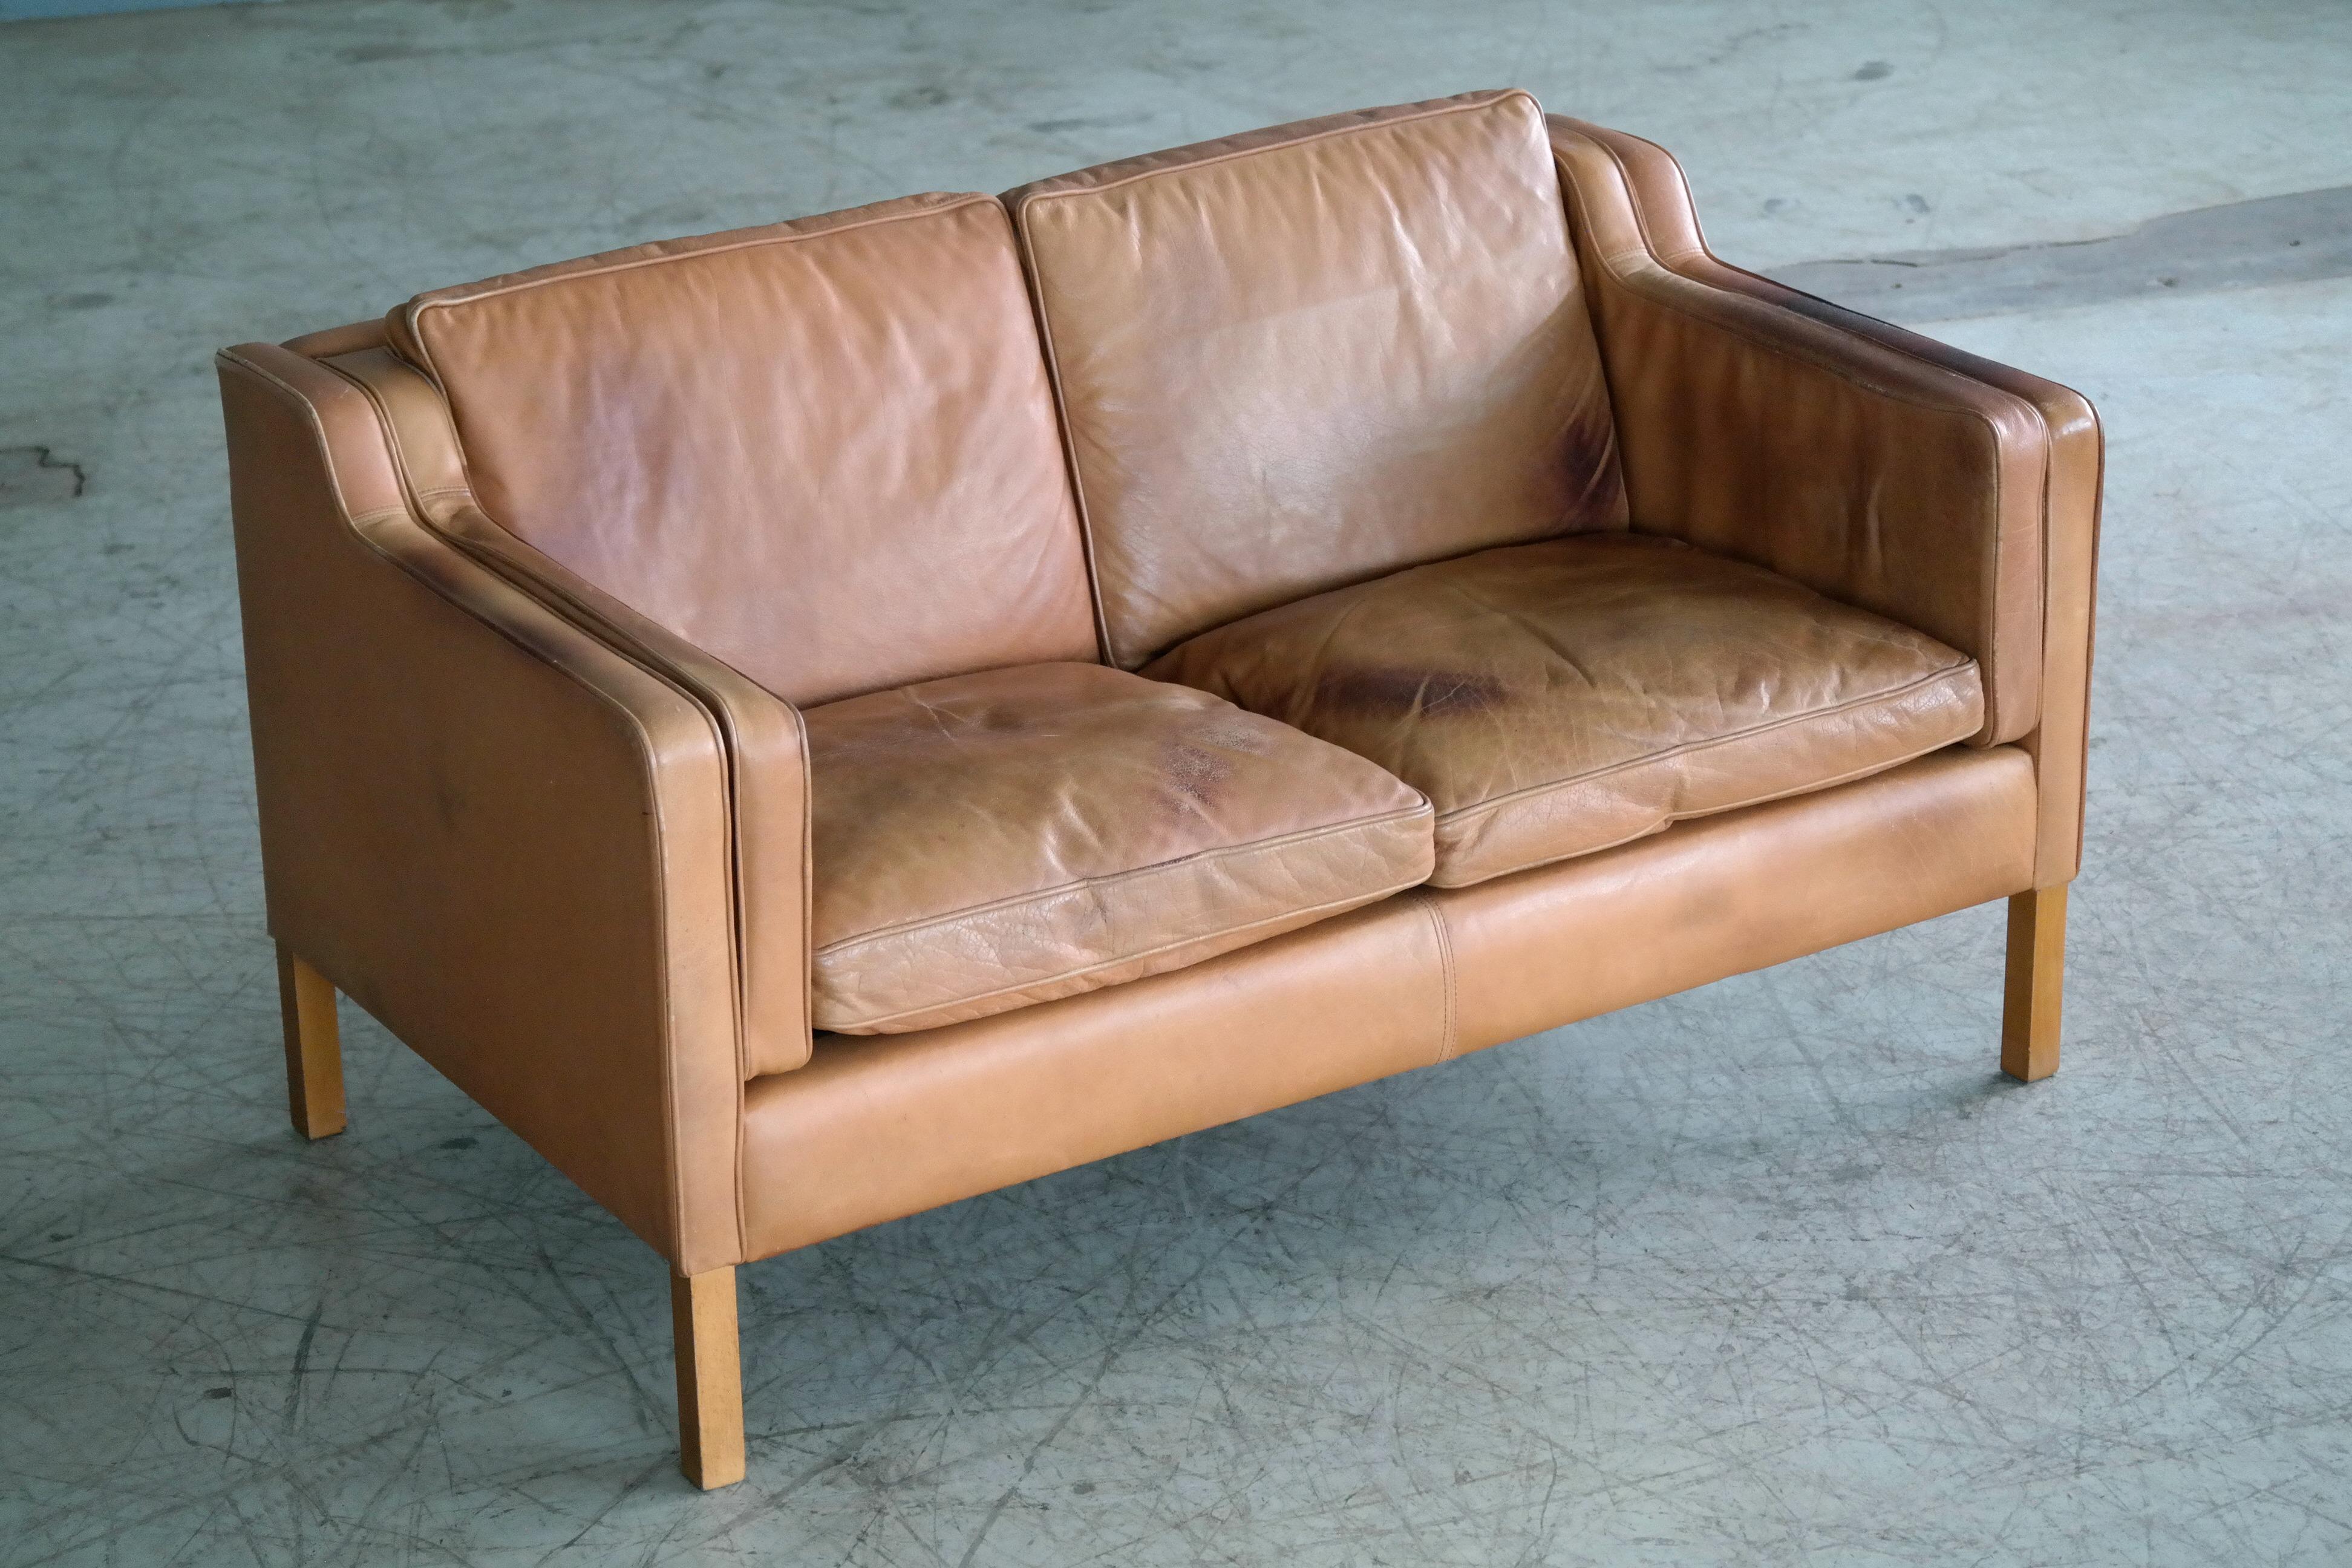 Mid-20th Century Danish Borge Mogensen Style Two-Seat Tan Leather Sofa with Patina by Stouby